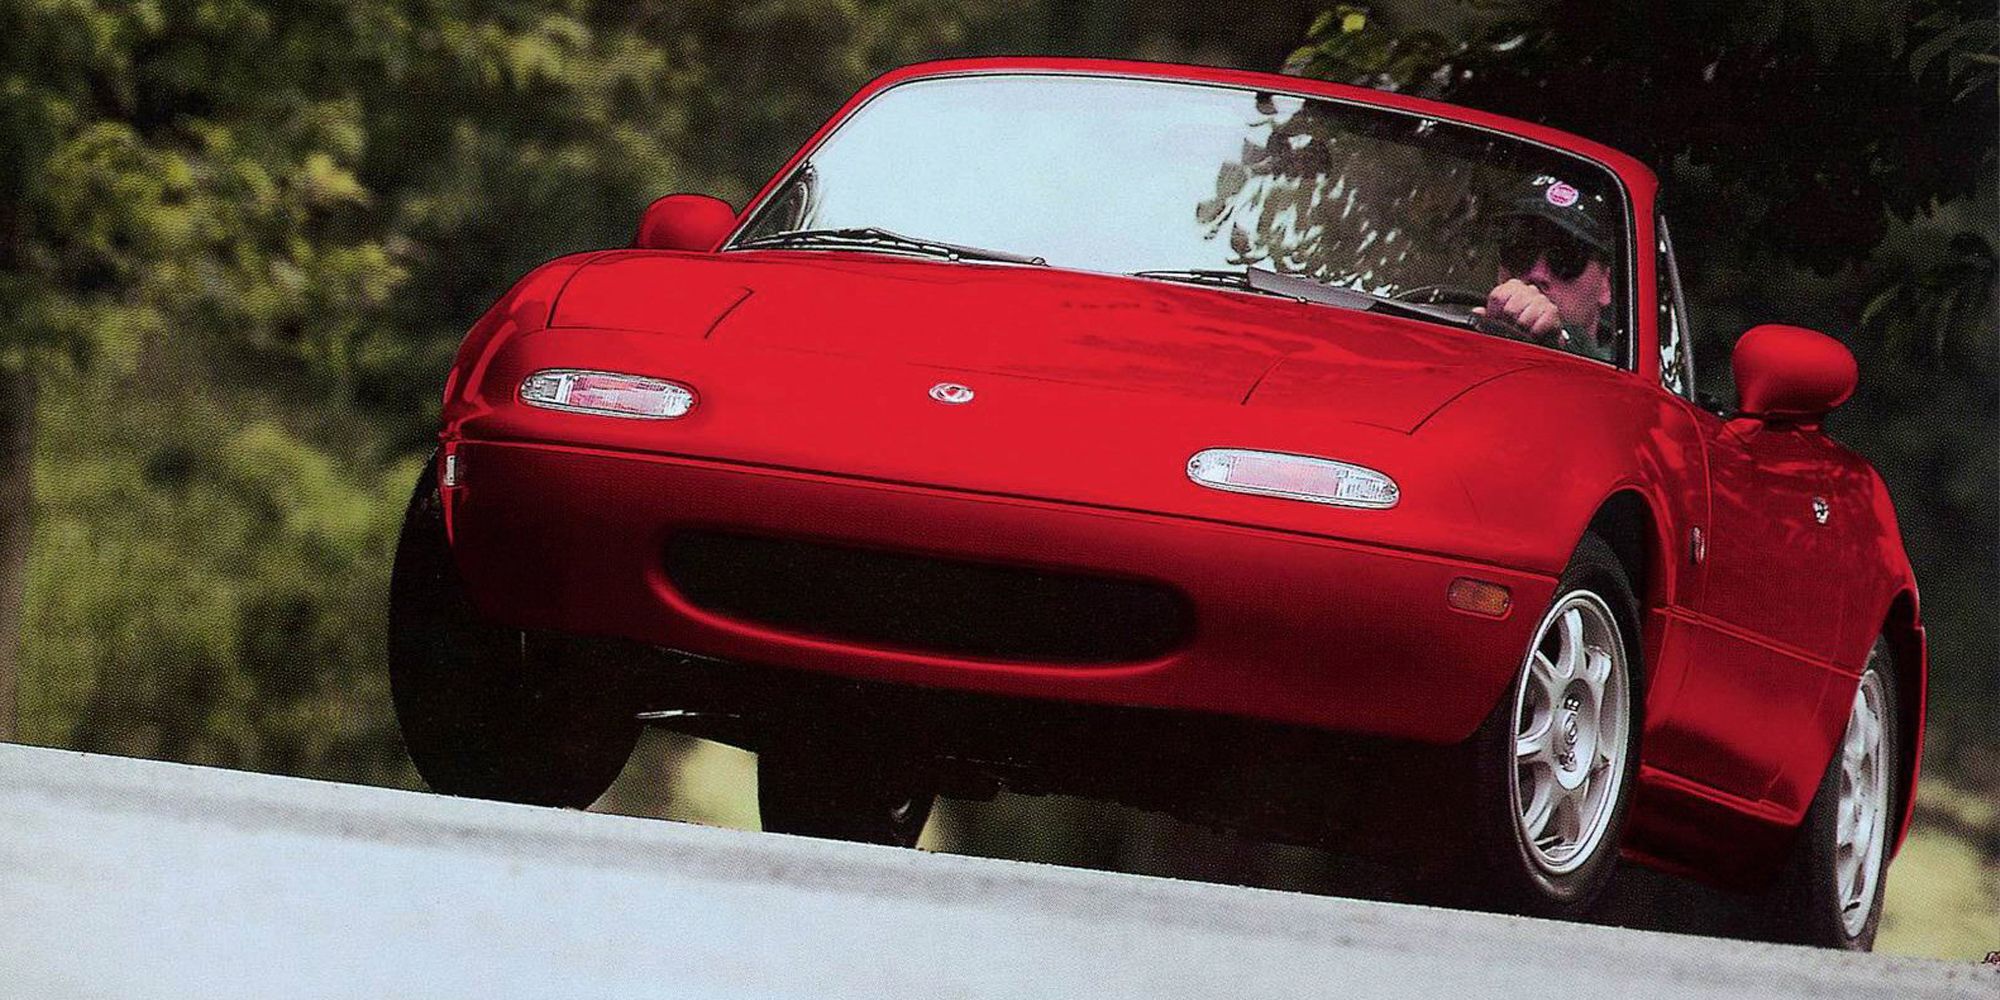 The front of a red NA Miata